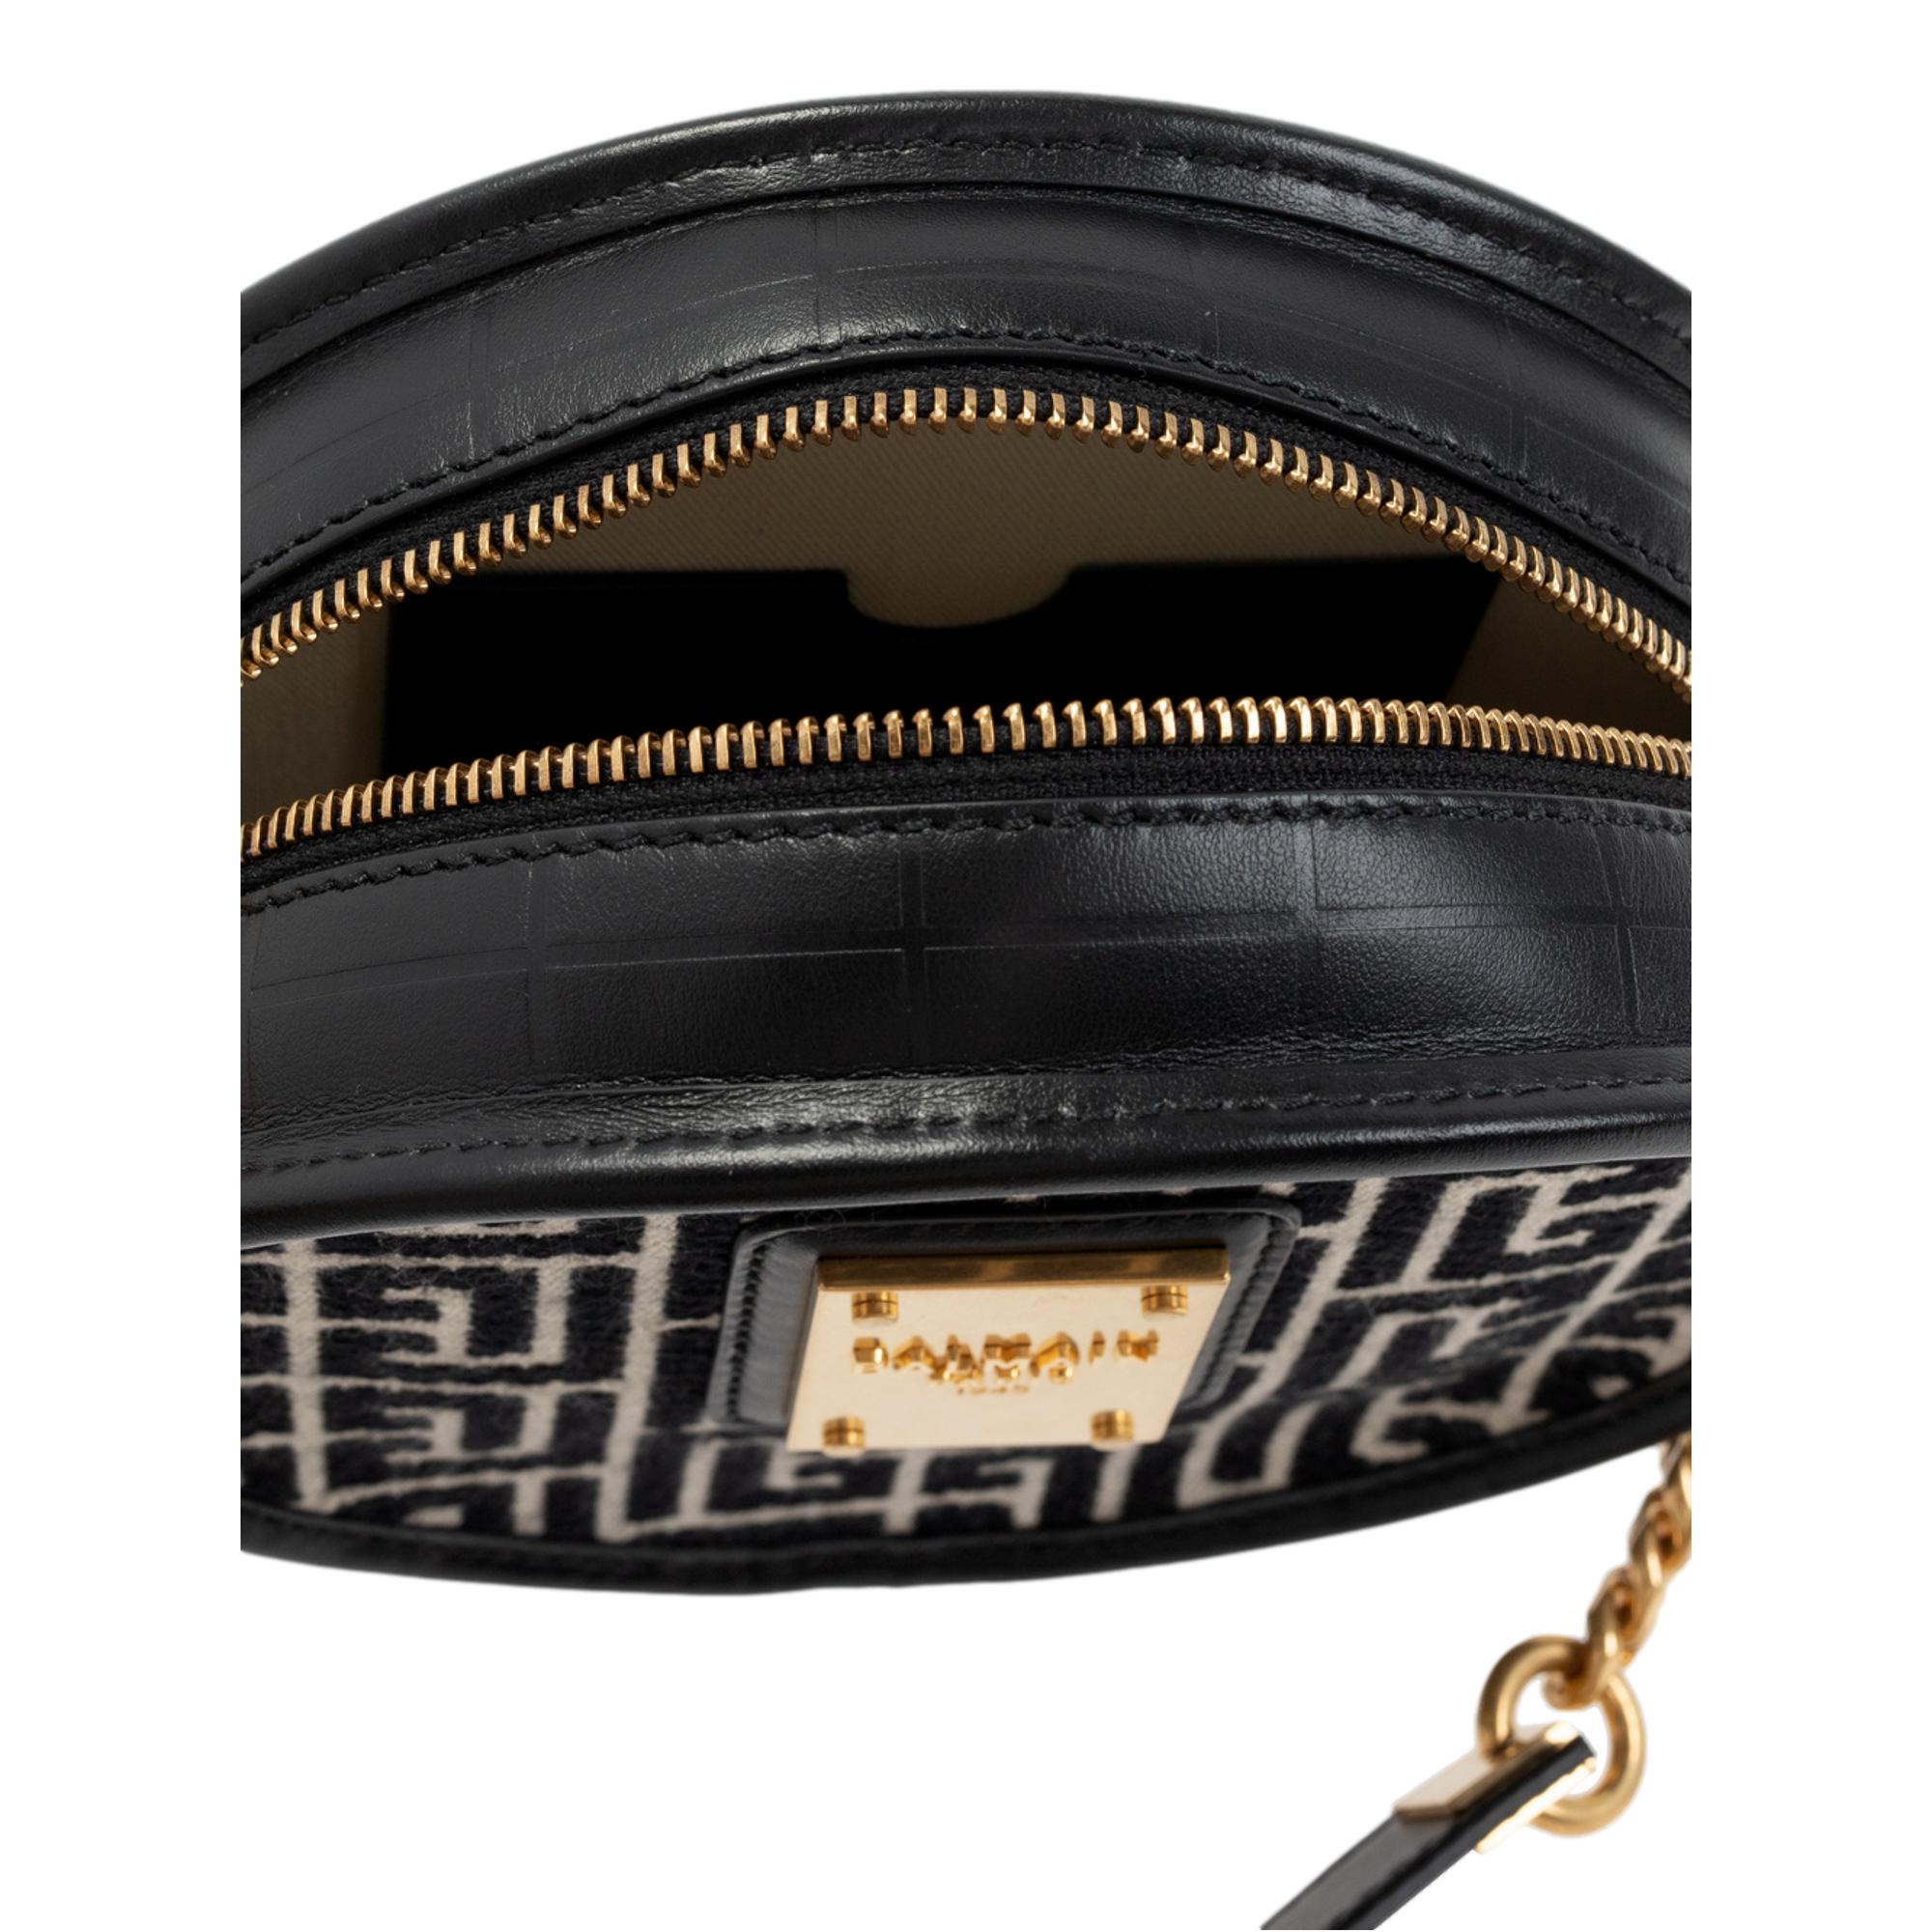 Balmain Canteen Black/Ivory Jacquard Logo Bag WN1CE654 at_Queen_Bee_of_Beverly_Hills